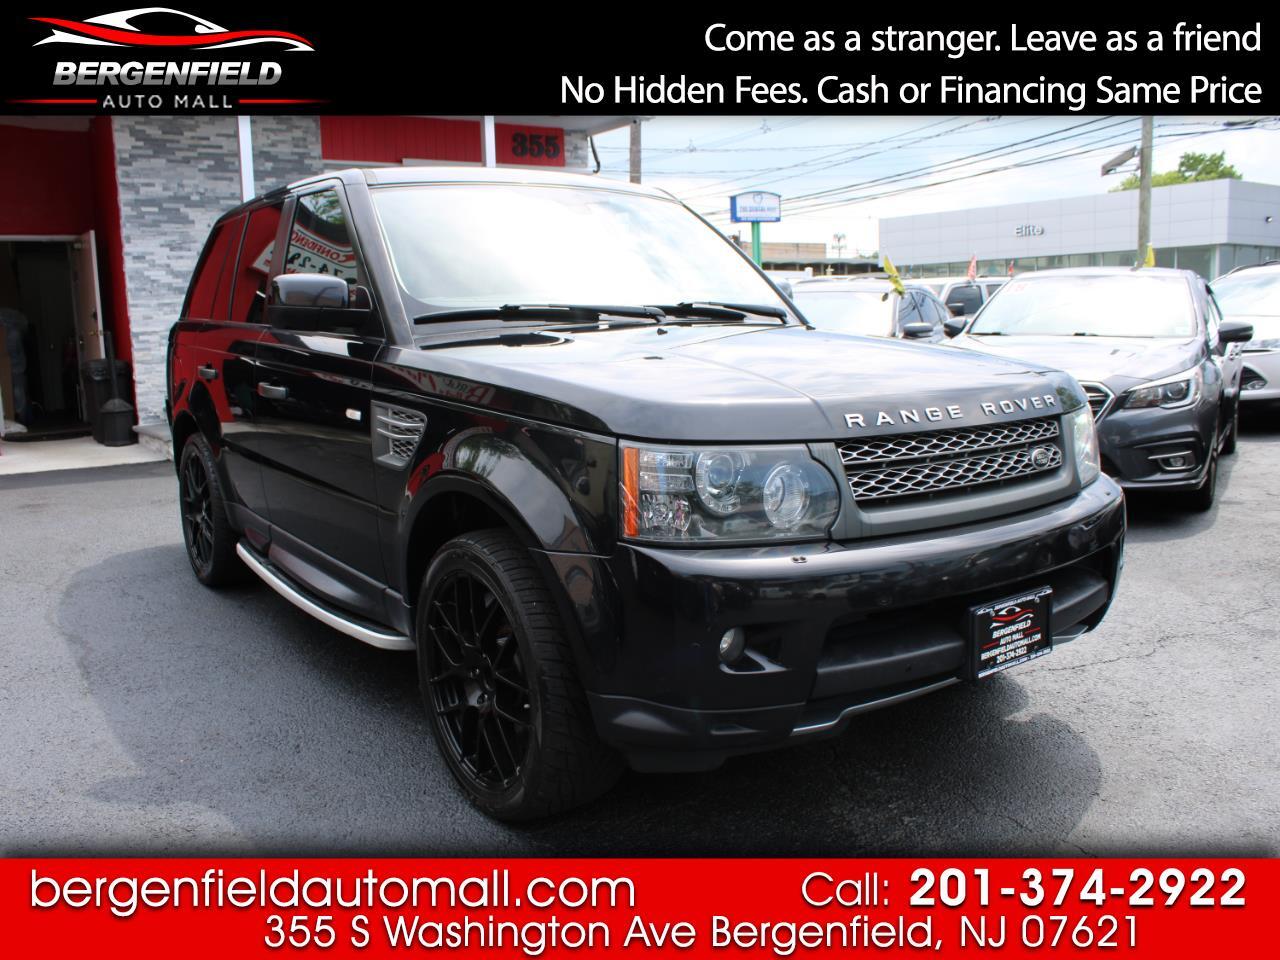 Used Land Rover Range Rover Sport Bergenfield Nj